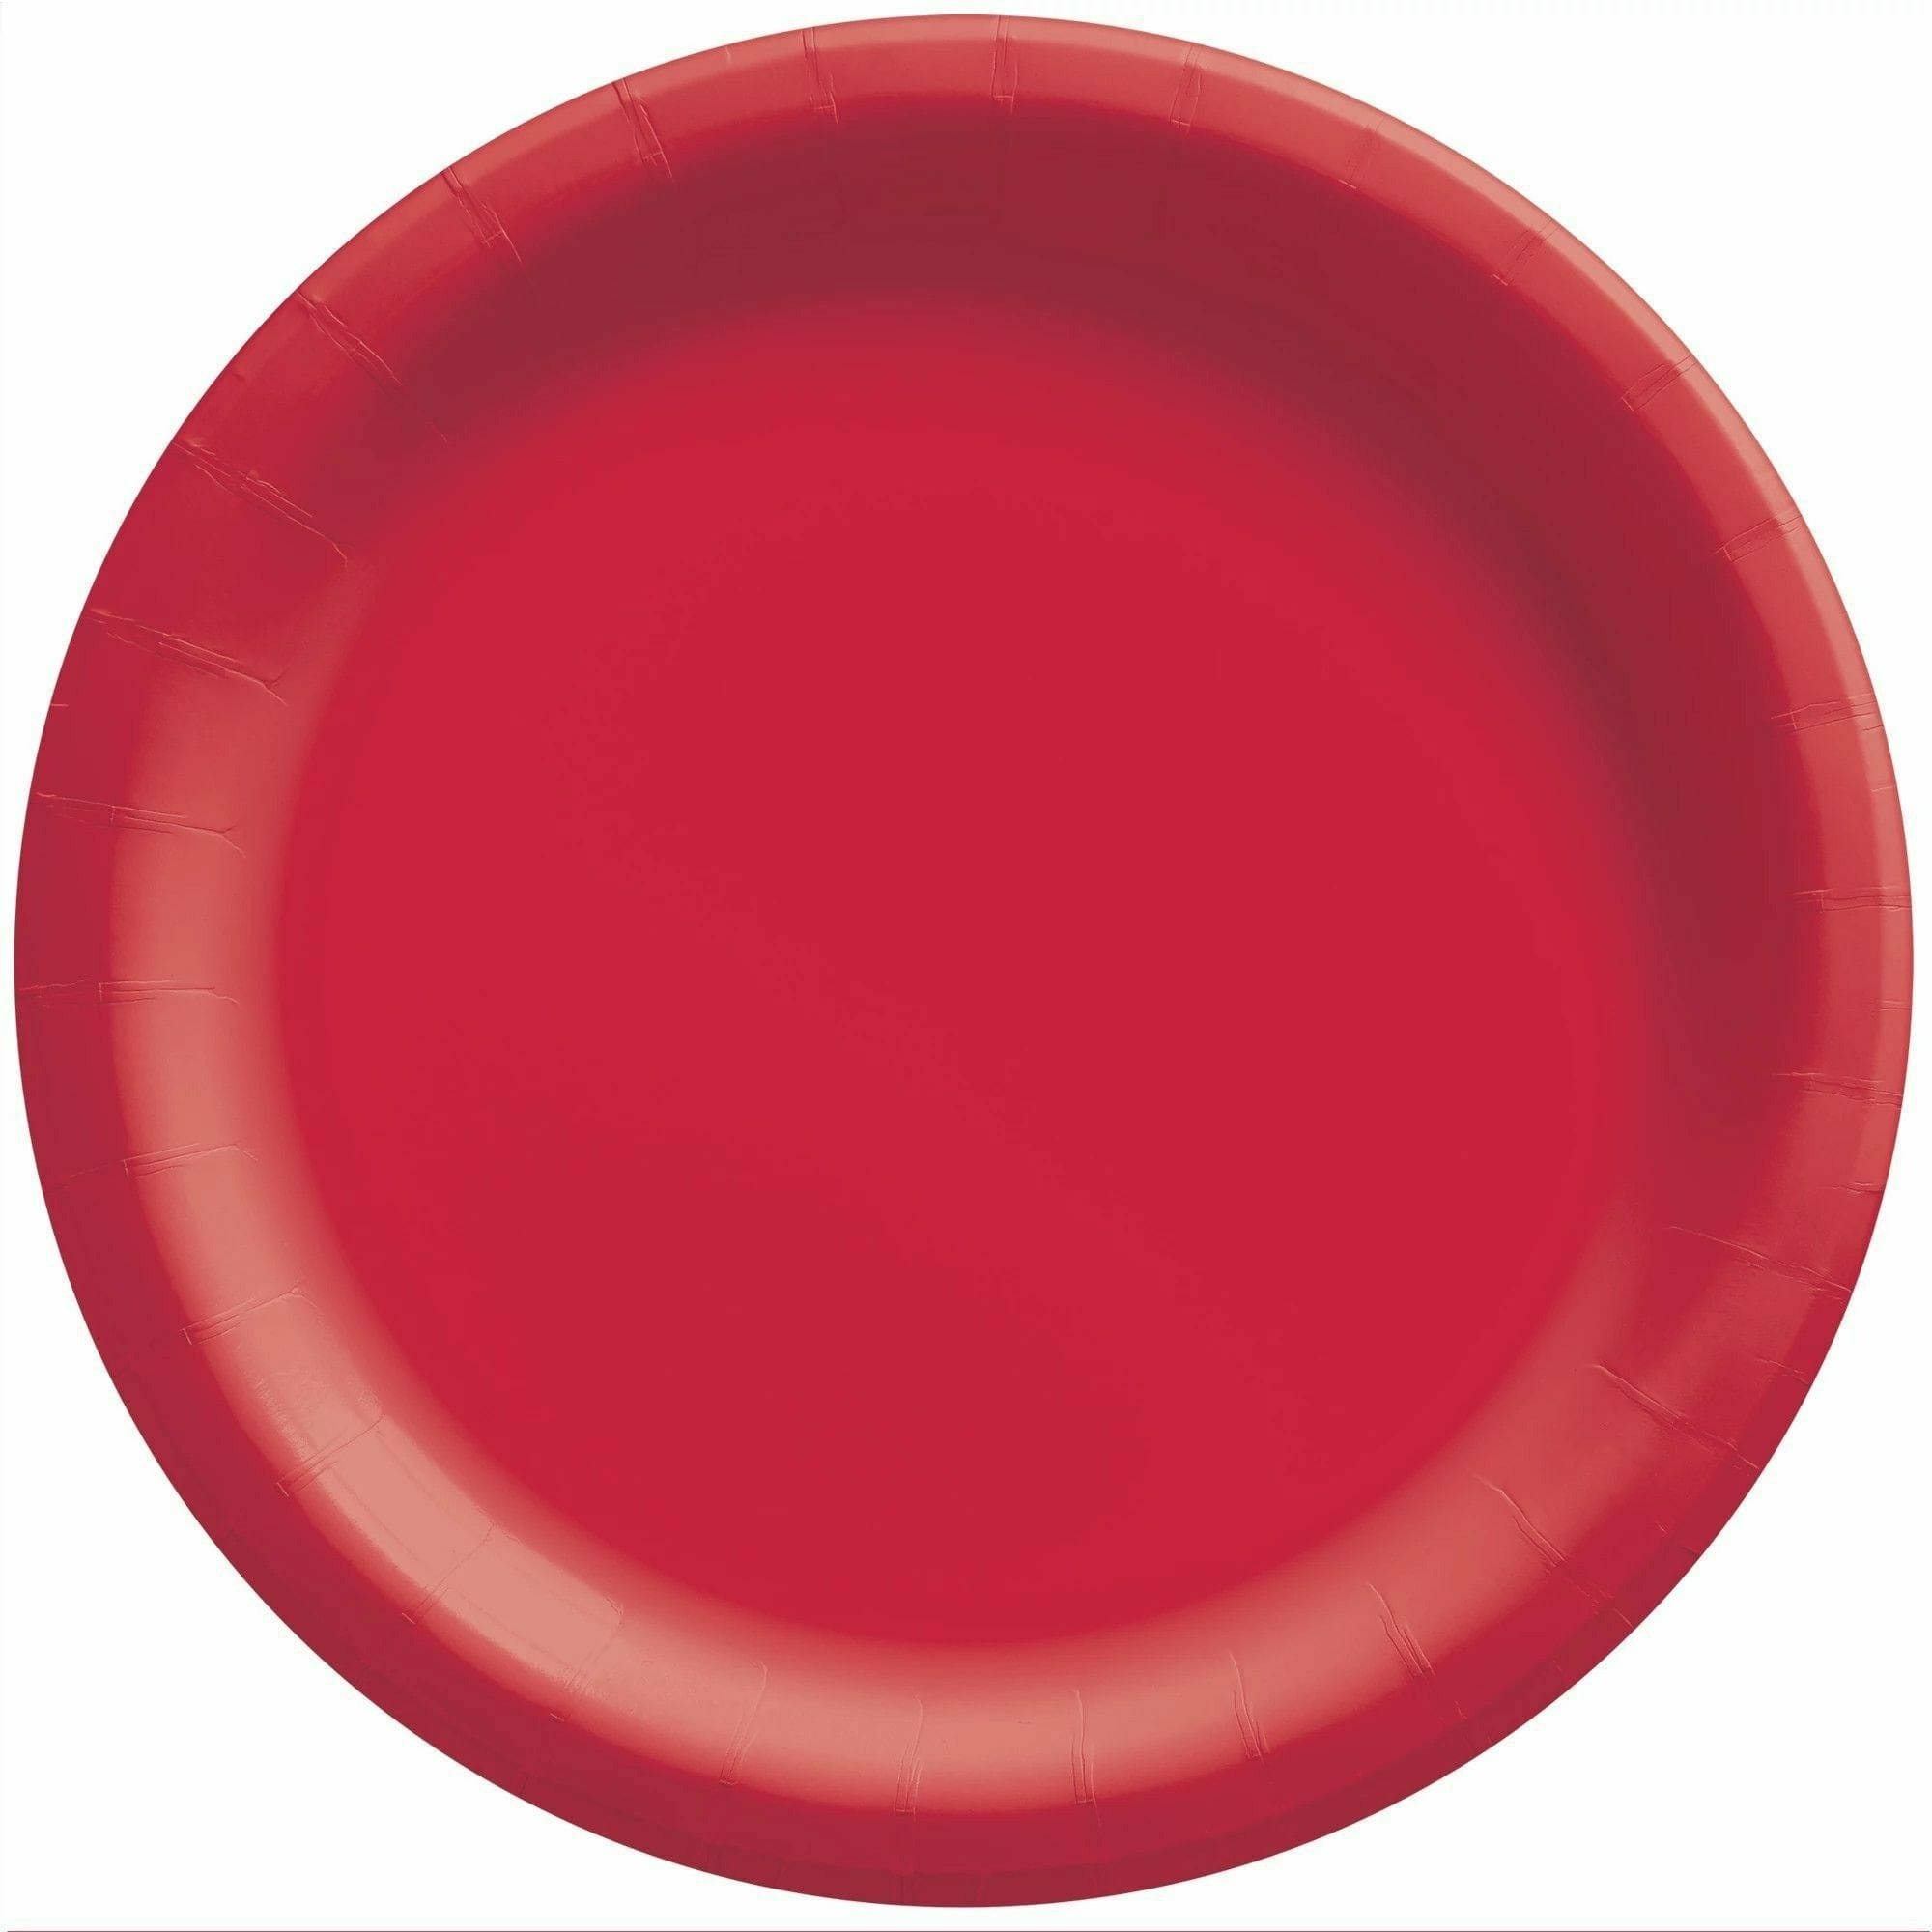 Amscan BASIC Apple Red - 8 1/2" Round Paper Plates, 20 Ct.